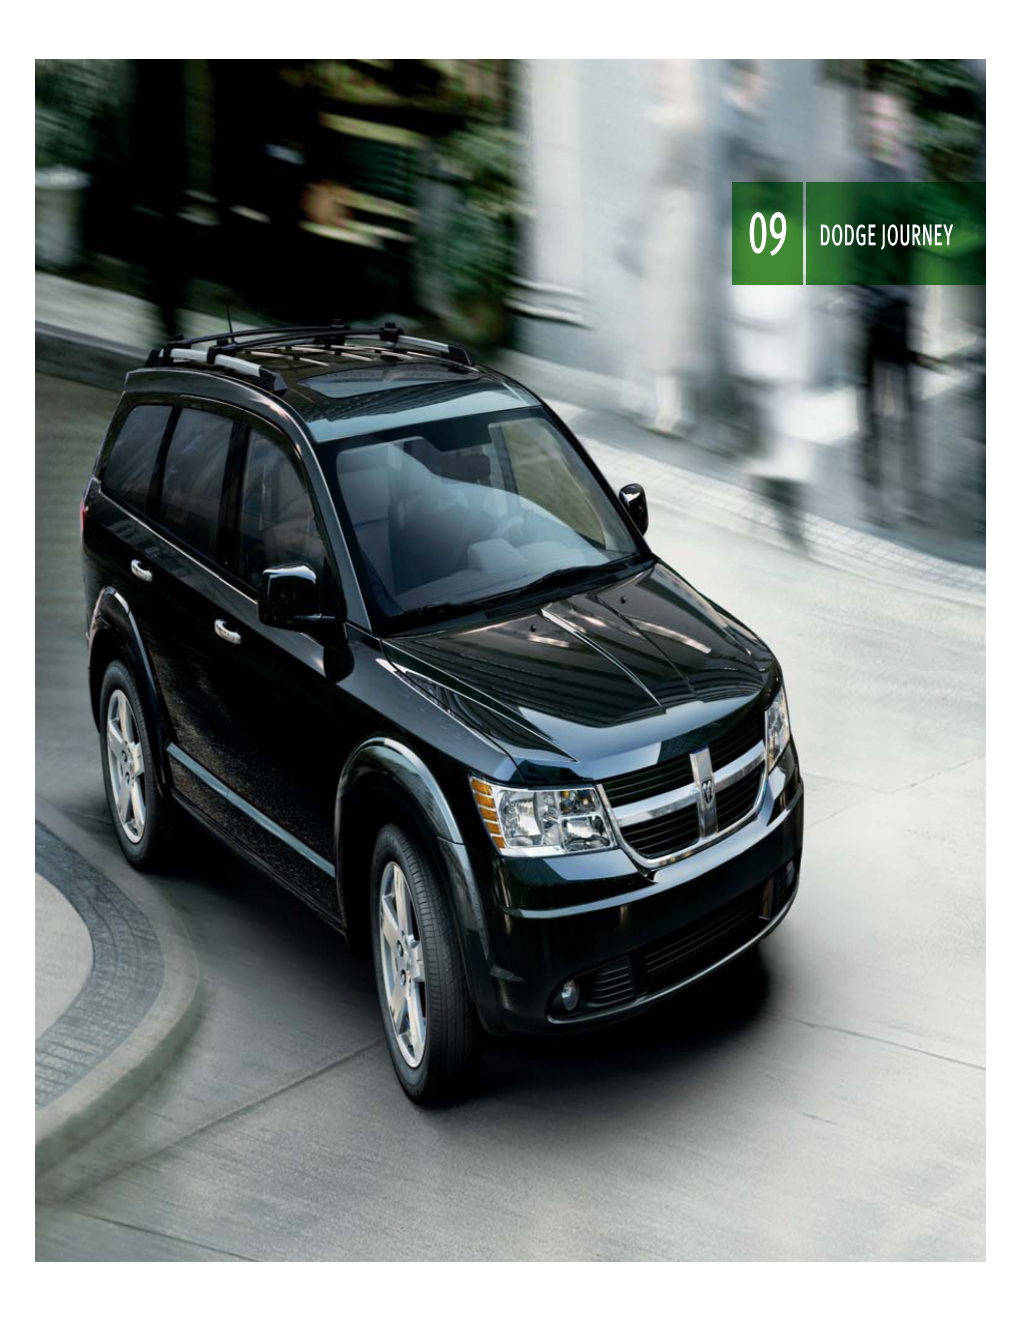 Dodge Journey with Its Smart Four-Cylinder Engine, It Delivers Best-In-Class[1] Fuel Economy